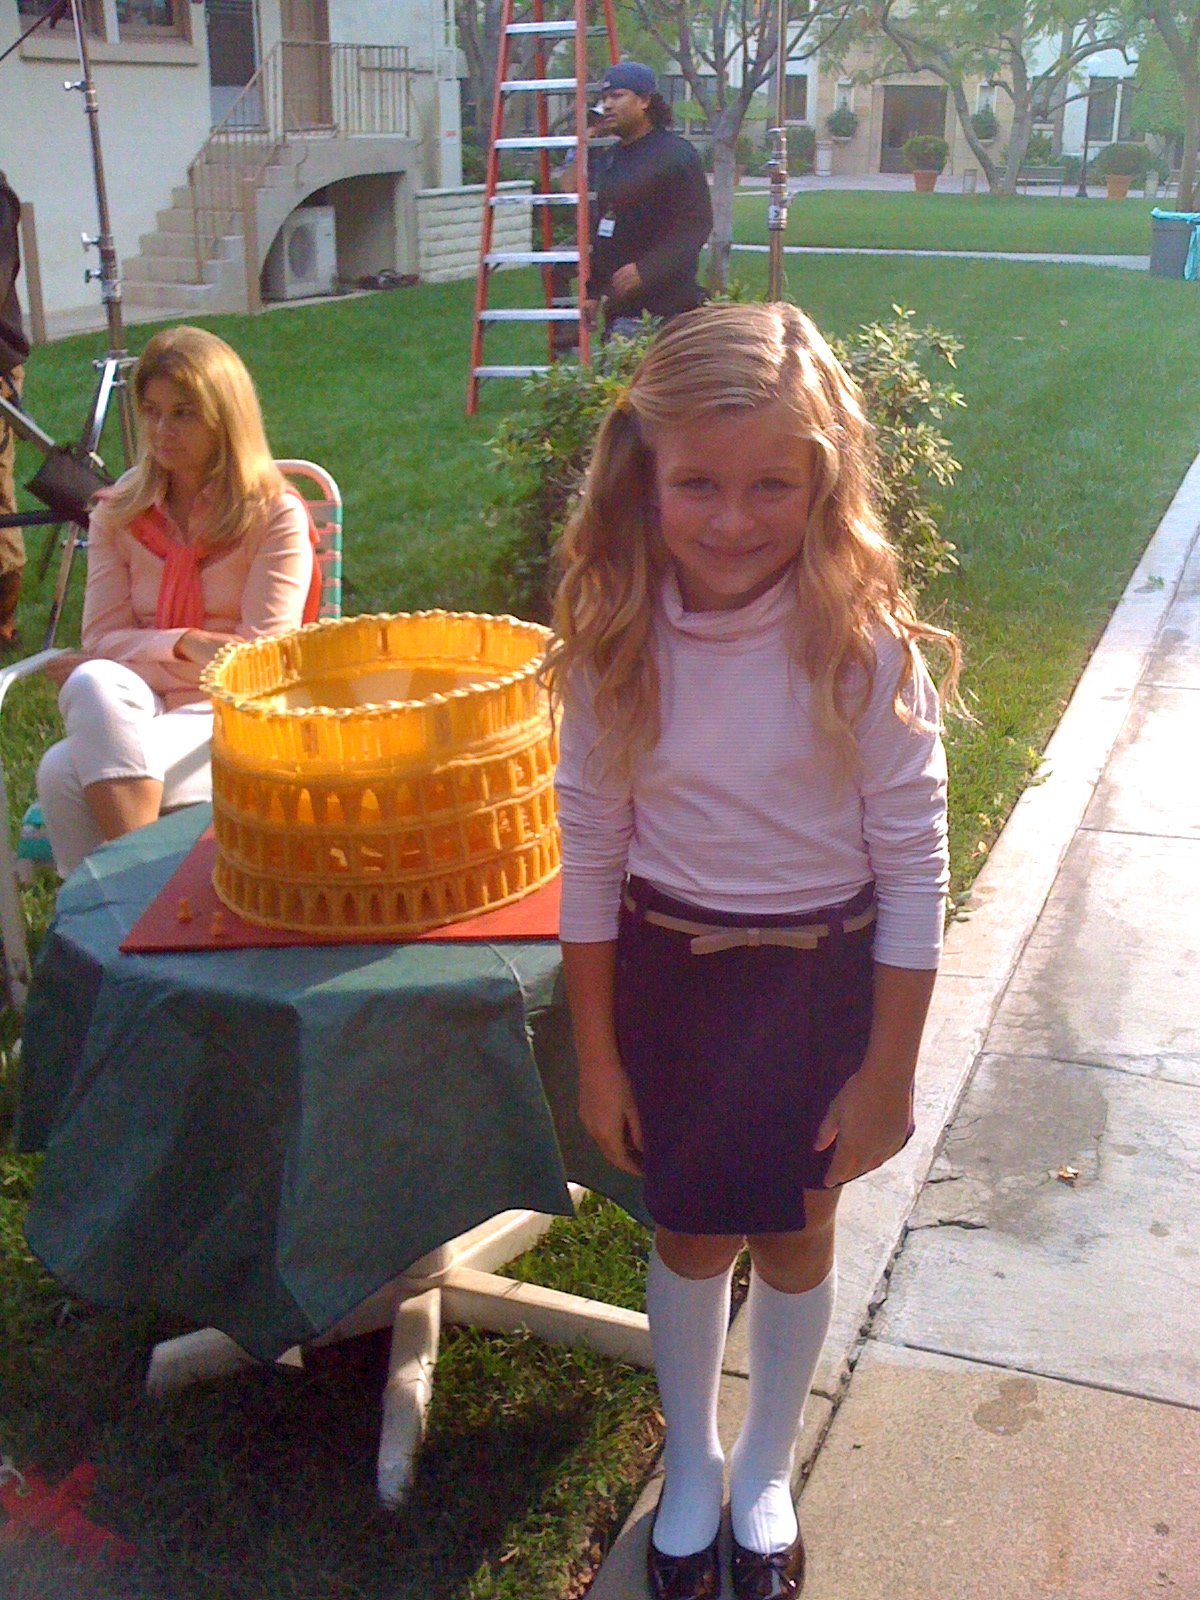 season 1 of Happy Endings ABC Daisy plays young Jane in episode 